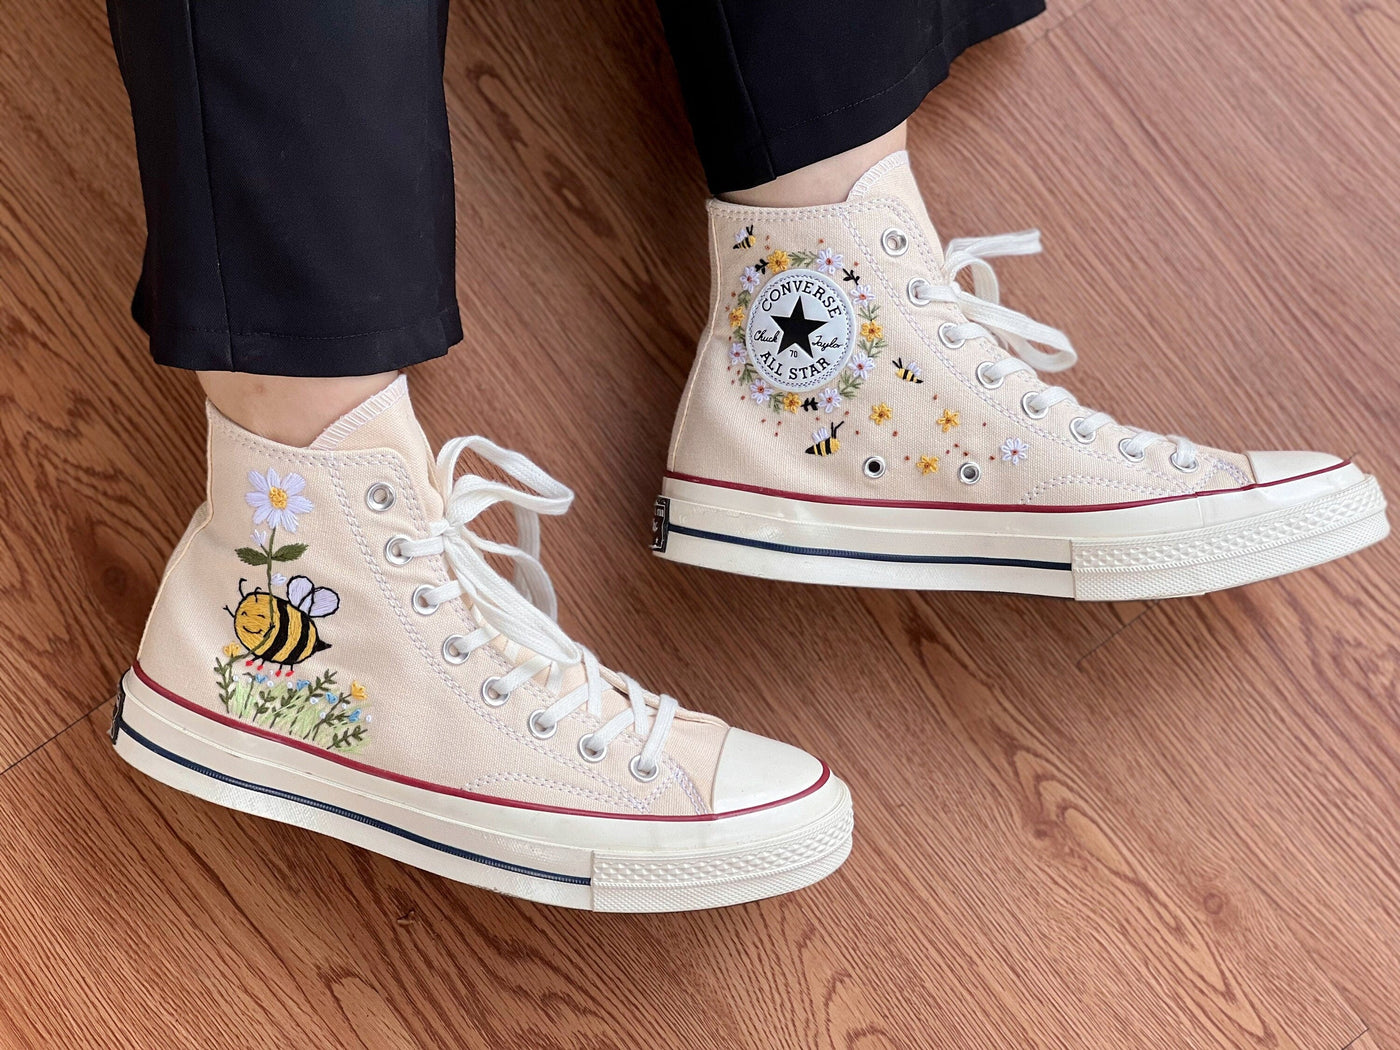 Custom Converse,Bees Converse, Converse Bees And Flowers